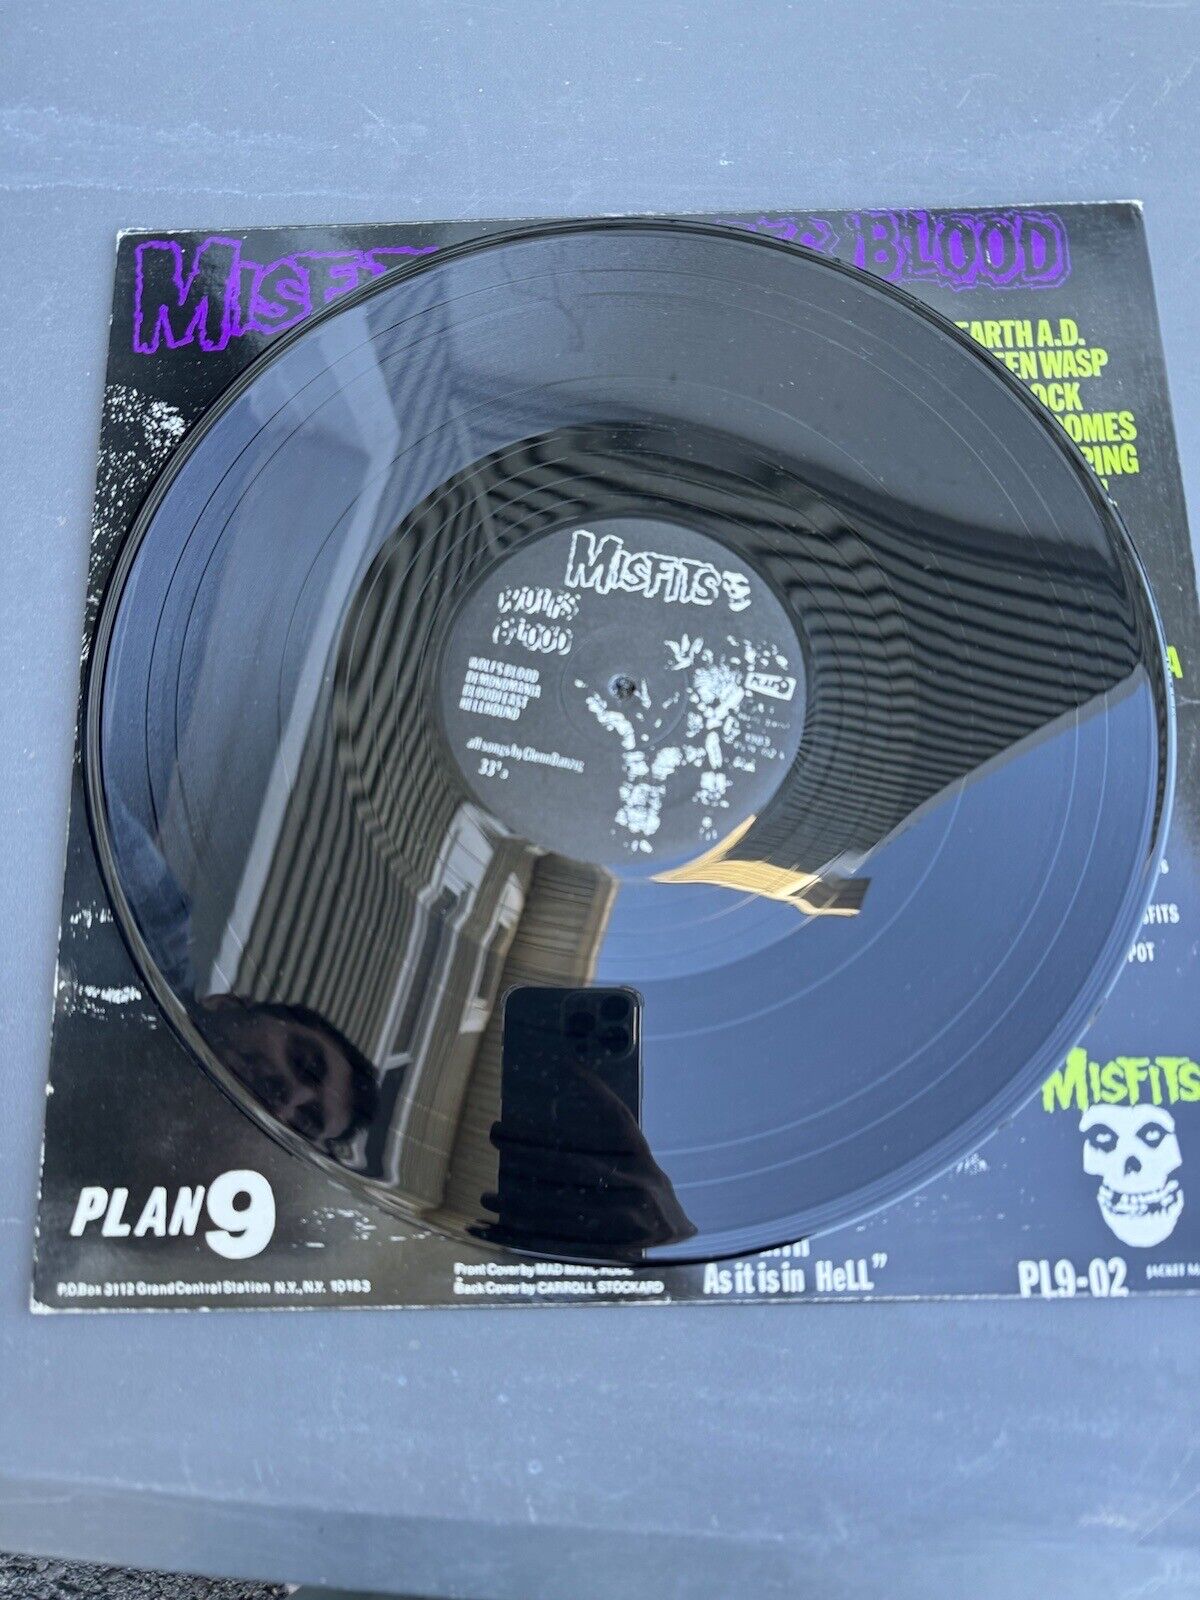 Misfits/ Earth A.D./Wolfs Blood Record